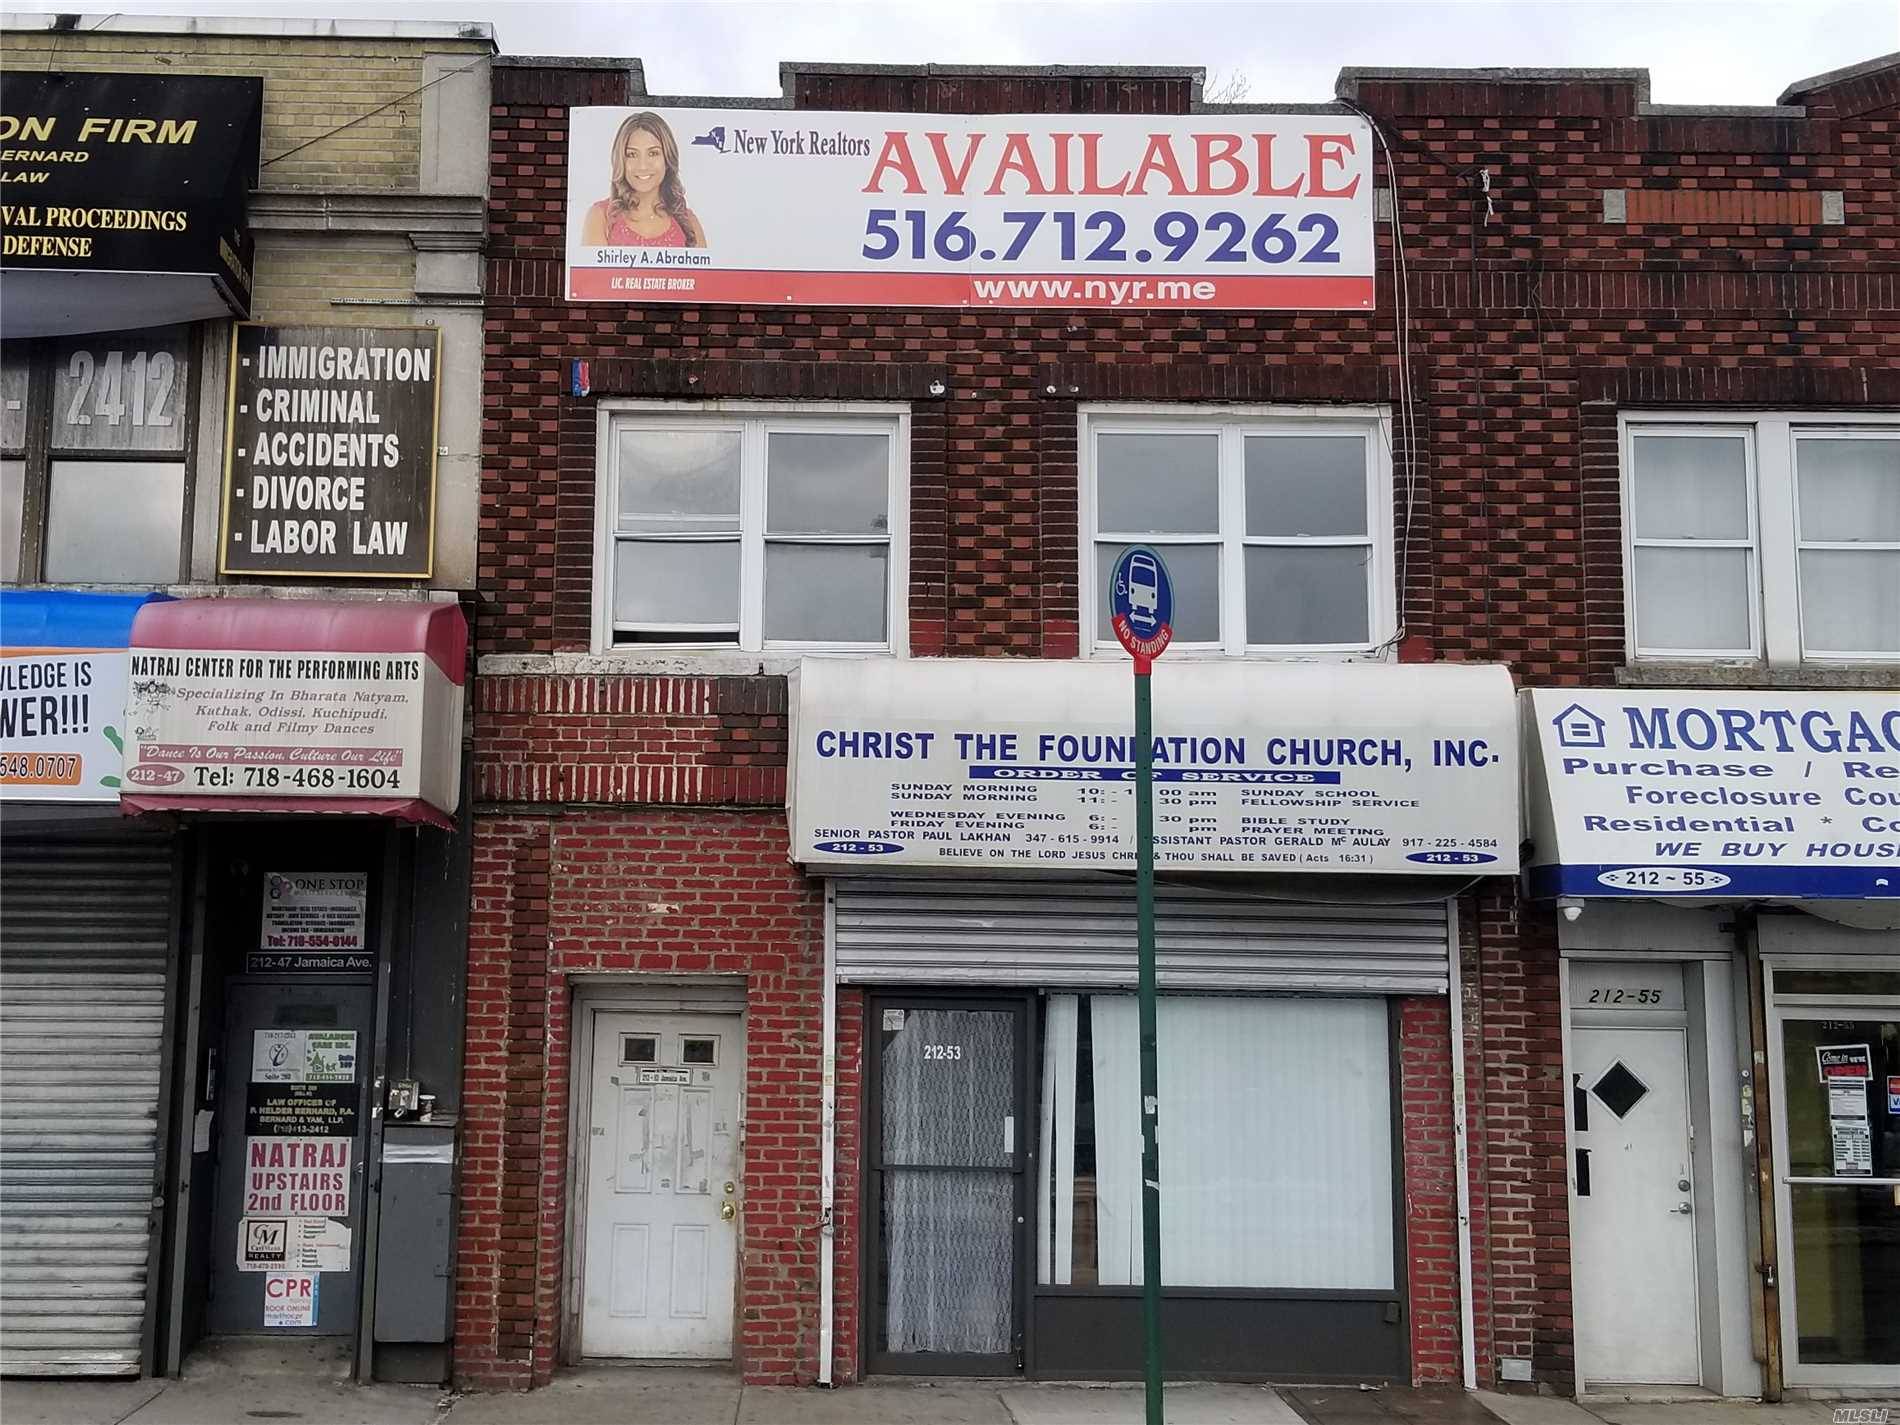 Prime Central  Location Long Island Meets Queens, 2720 Square Ft Mixed  Use Building Building .